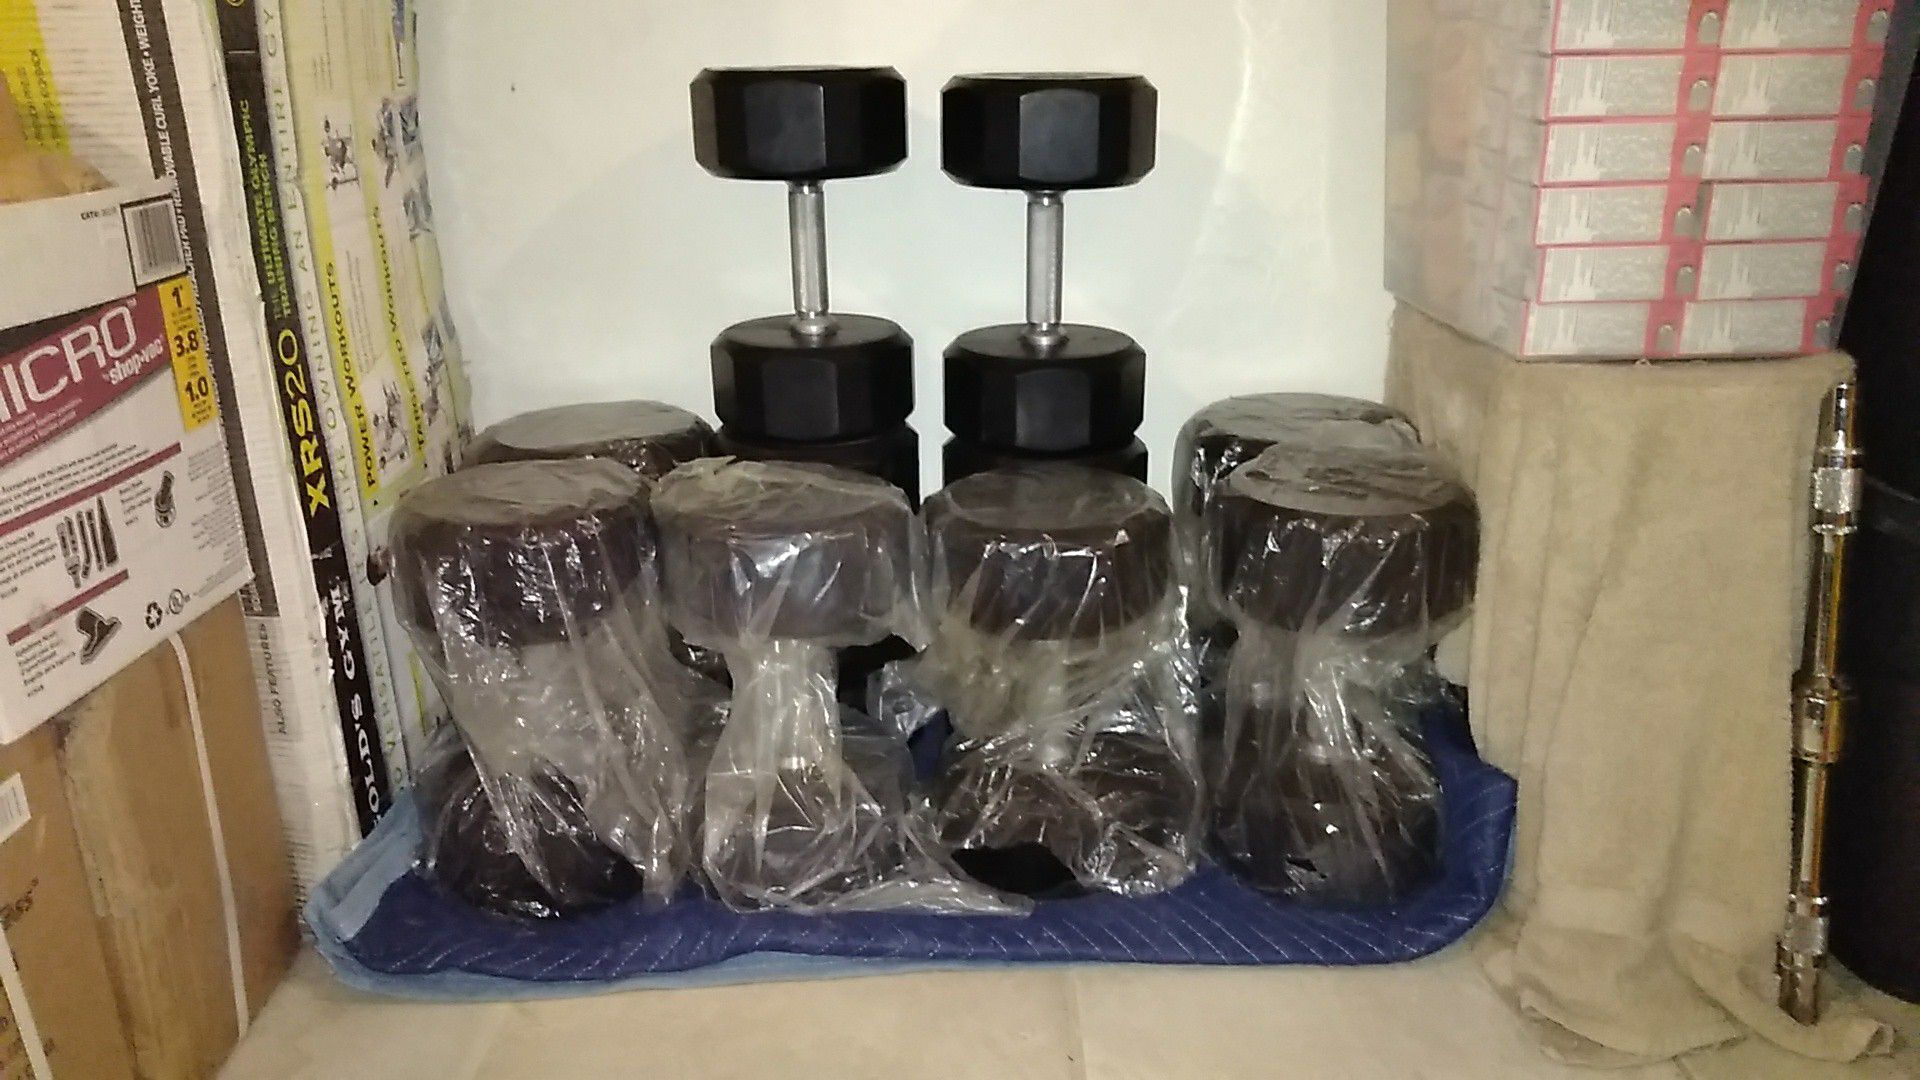 Brand new dumbbells 650 lbs of commercial Troy 12 sided rubber Weights almost $1600 online $1500 OBO never opened my gym so they sit here